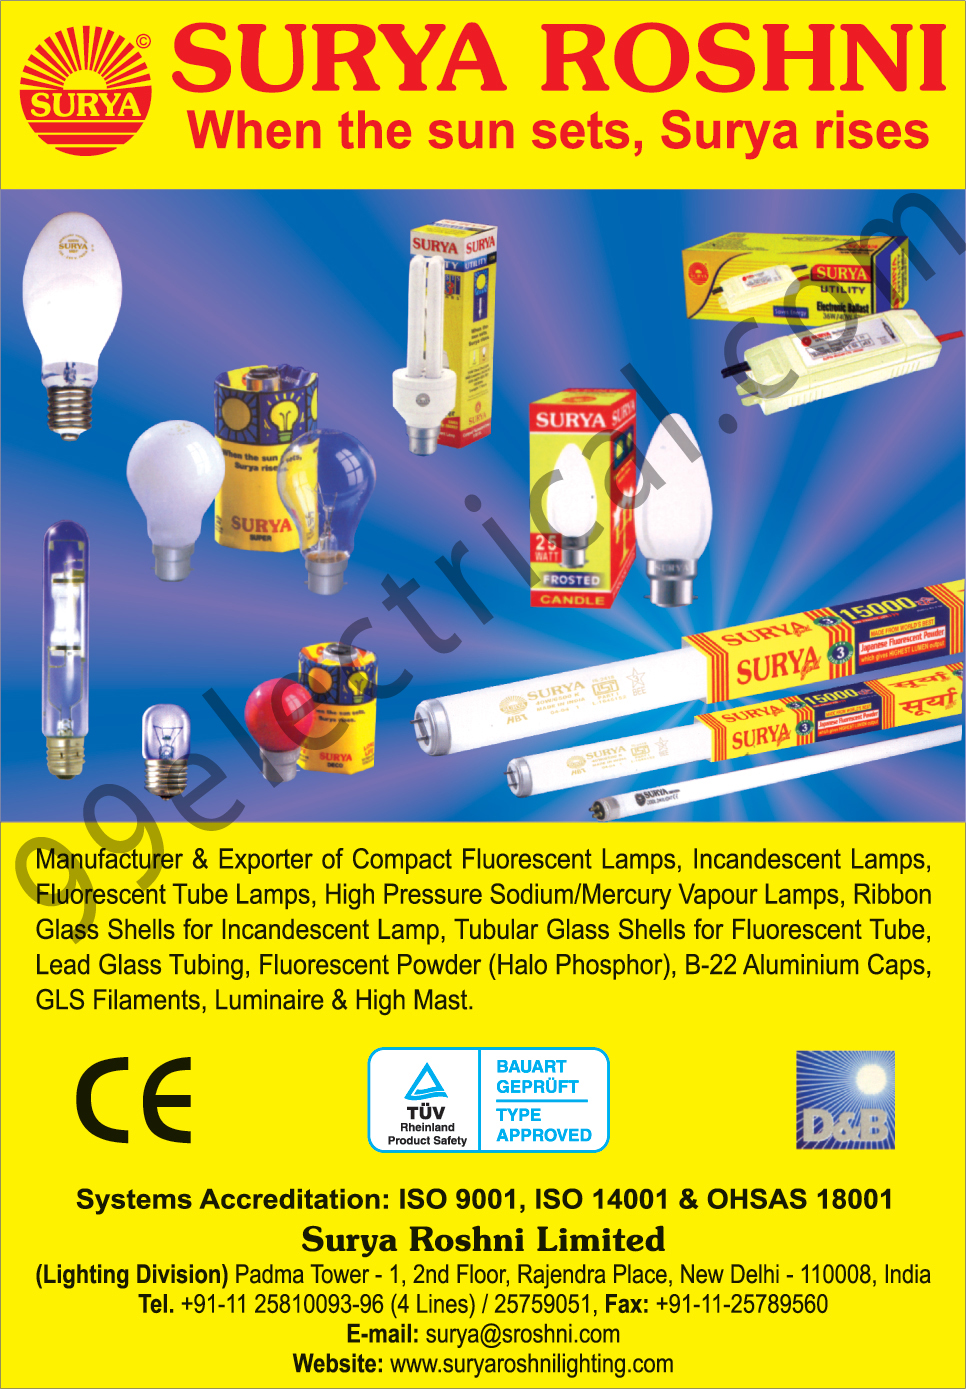 Compact Fluorescent Lamps, CFL, Incandescent Lamps, Fluorescent Tube Lamps, FTL, Sodium Vapour Lamps, Mercury Vapour Lamps, Incandescent Lamp Ribbon Glass Shells, Fluorescent Tube Tubular Glass Shells, Lead Glass Tubing, Fluorescent Powders, Halo Phosphor, B 22 Aluminum Caps, GLS Filaments, Luminaire, High Mast,Fluorescent Tube Lamp, Lamps, Luminaries Mast, Tubular Glass Shells CFL, Down lighters, Led Lamps, Lighting Fixtures, Outdoor, Lighting Fixtures, T5 FTL, Industrial Lights, Flood Lights, Electrical Accessories, Street Lights, Led Lights, Led Bulbs, Led Tubes, CFL, GLS, Choke, Starter, Electrical Items, Electrical Product